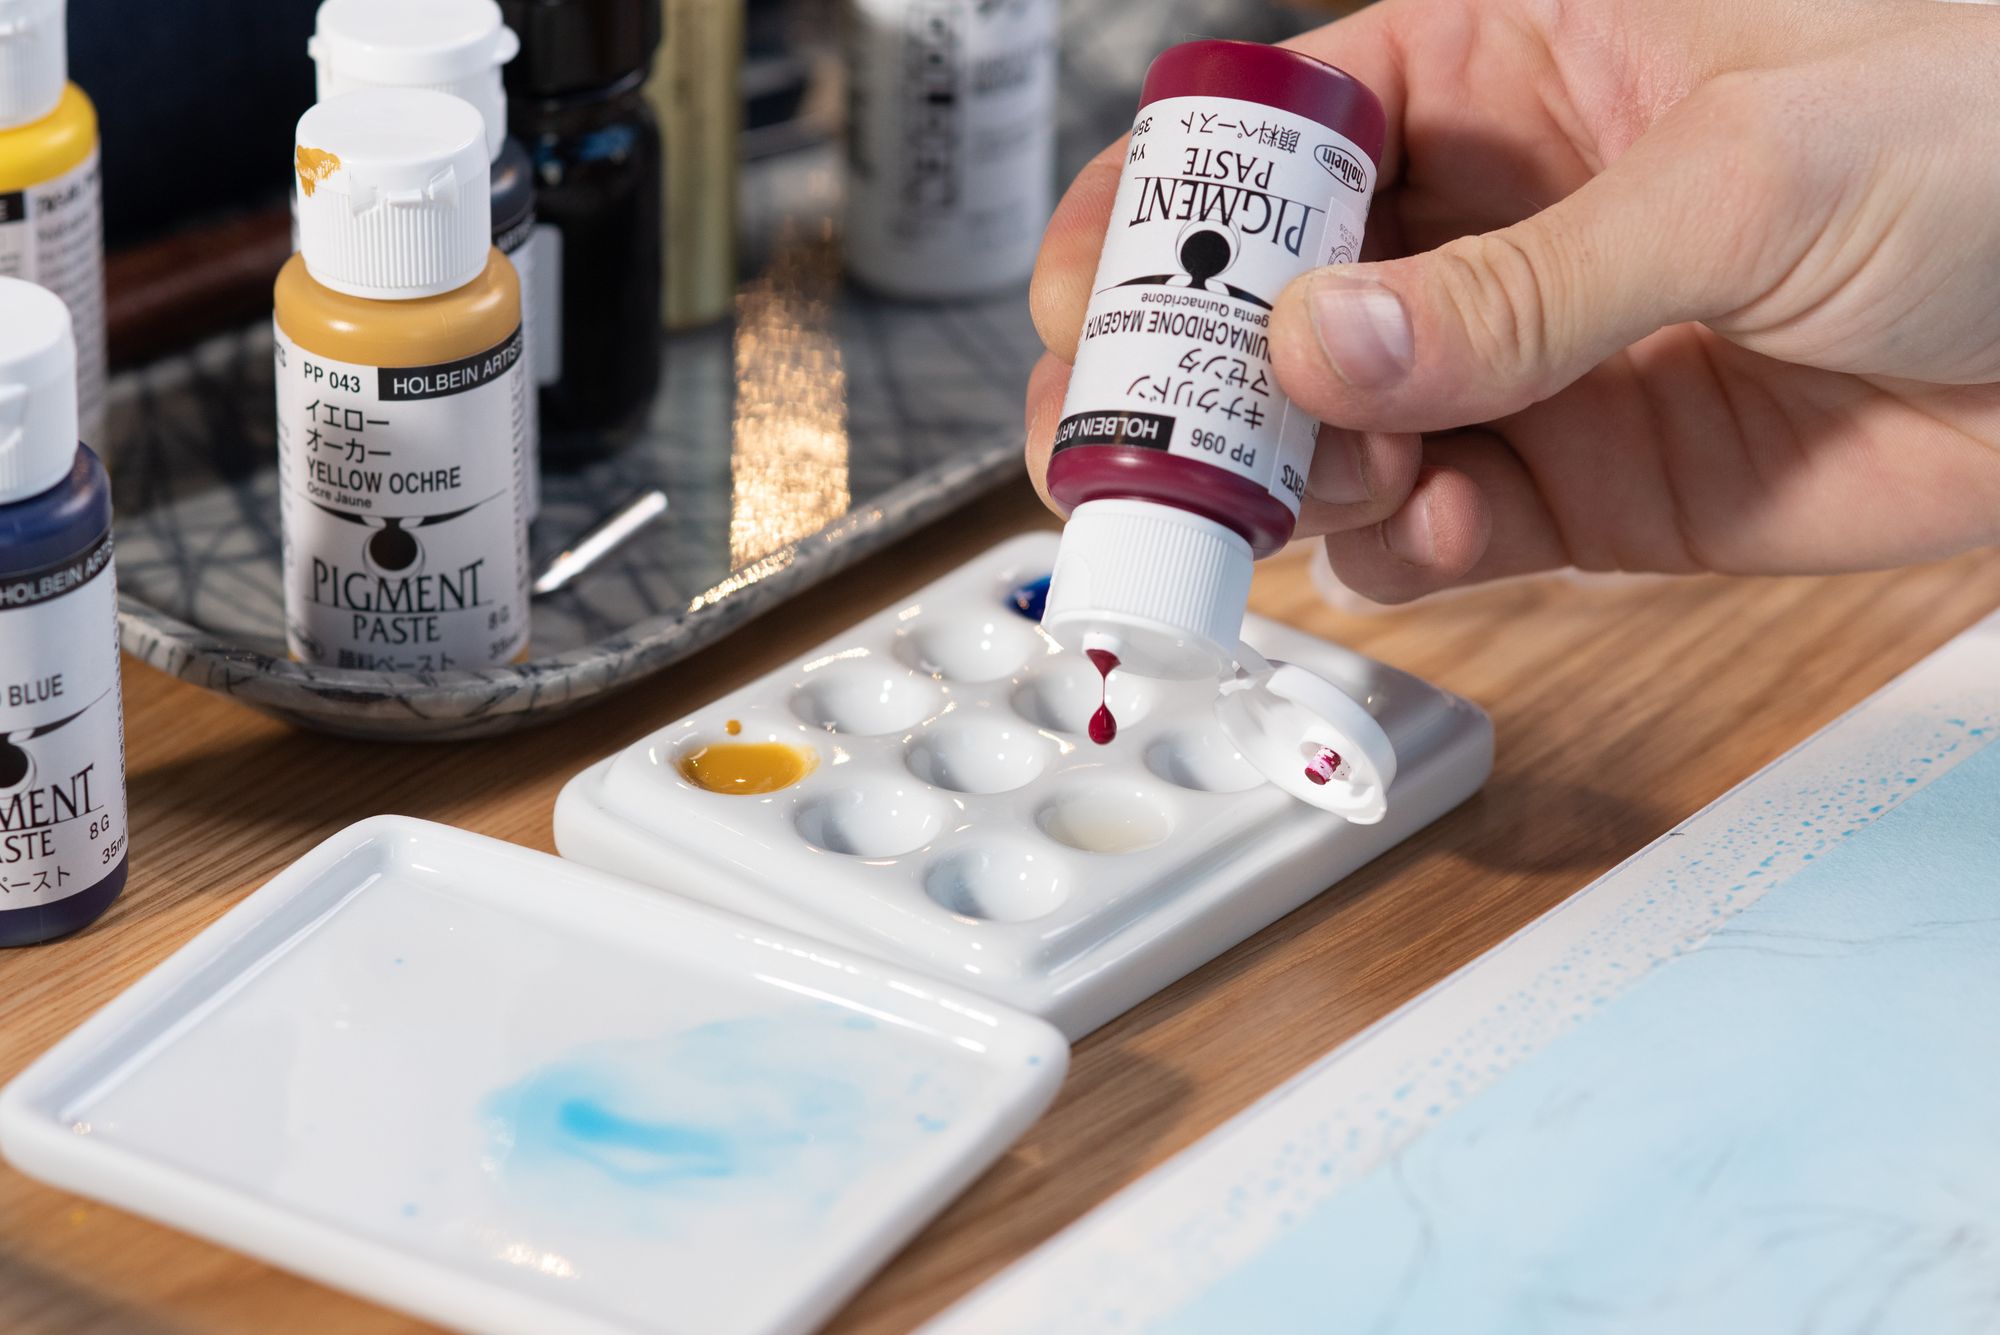 Product Test: Holbein Pigment Paste